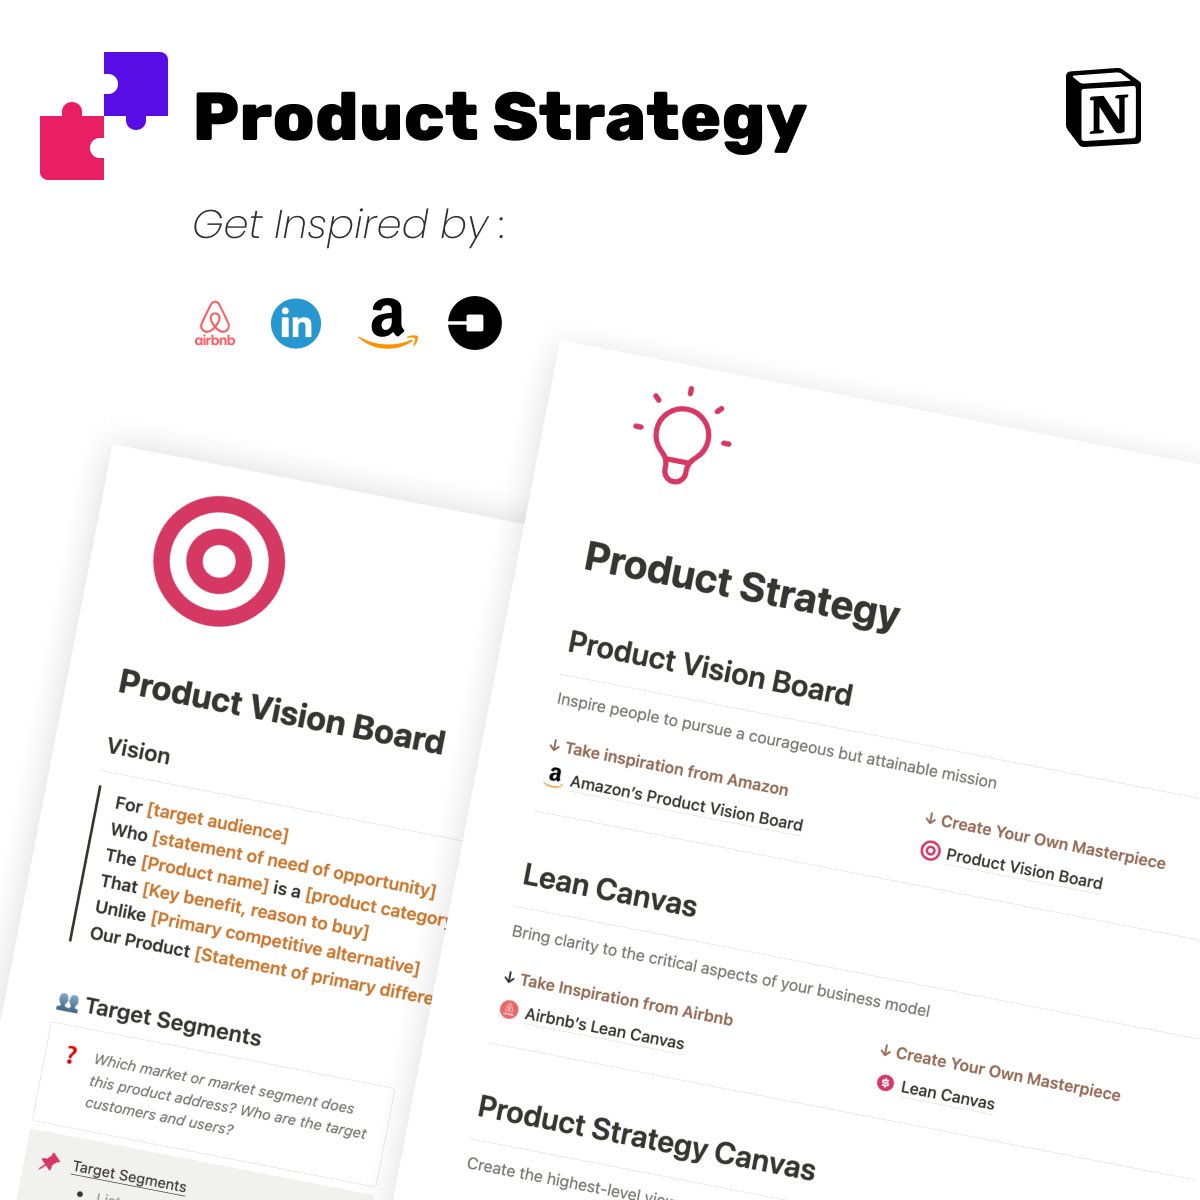 🎉 Launched 'Product Strategy’ Notion template!
It includes: 
➤Product Vision Board
➤Lean Canvas
➤Product Strategy Canvas
➤Product Roadmap

I'm offering it for FREE to #productmanagers & #productmakers 😍
Follow me and comment 'Strategy' to get access. 
#productstrategy